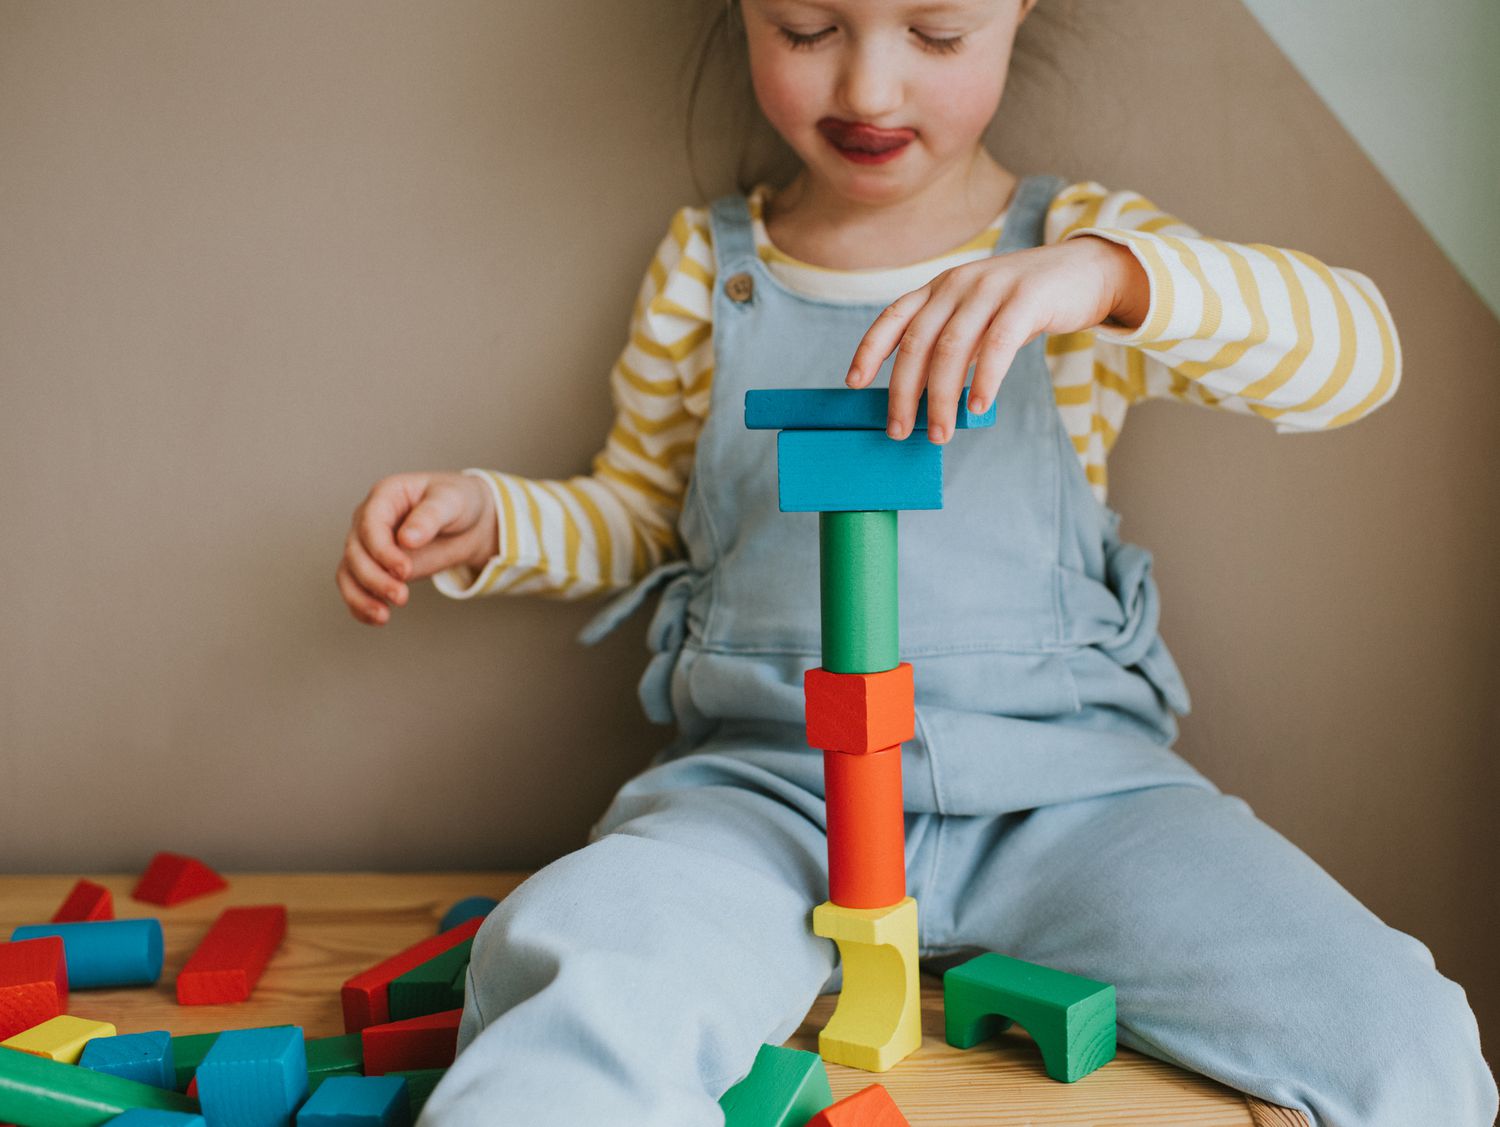 An image of a child playing with blocks.